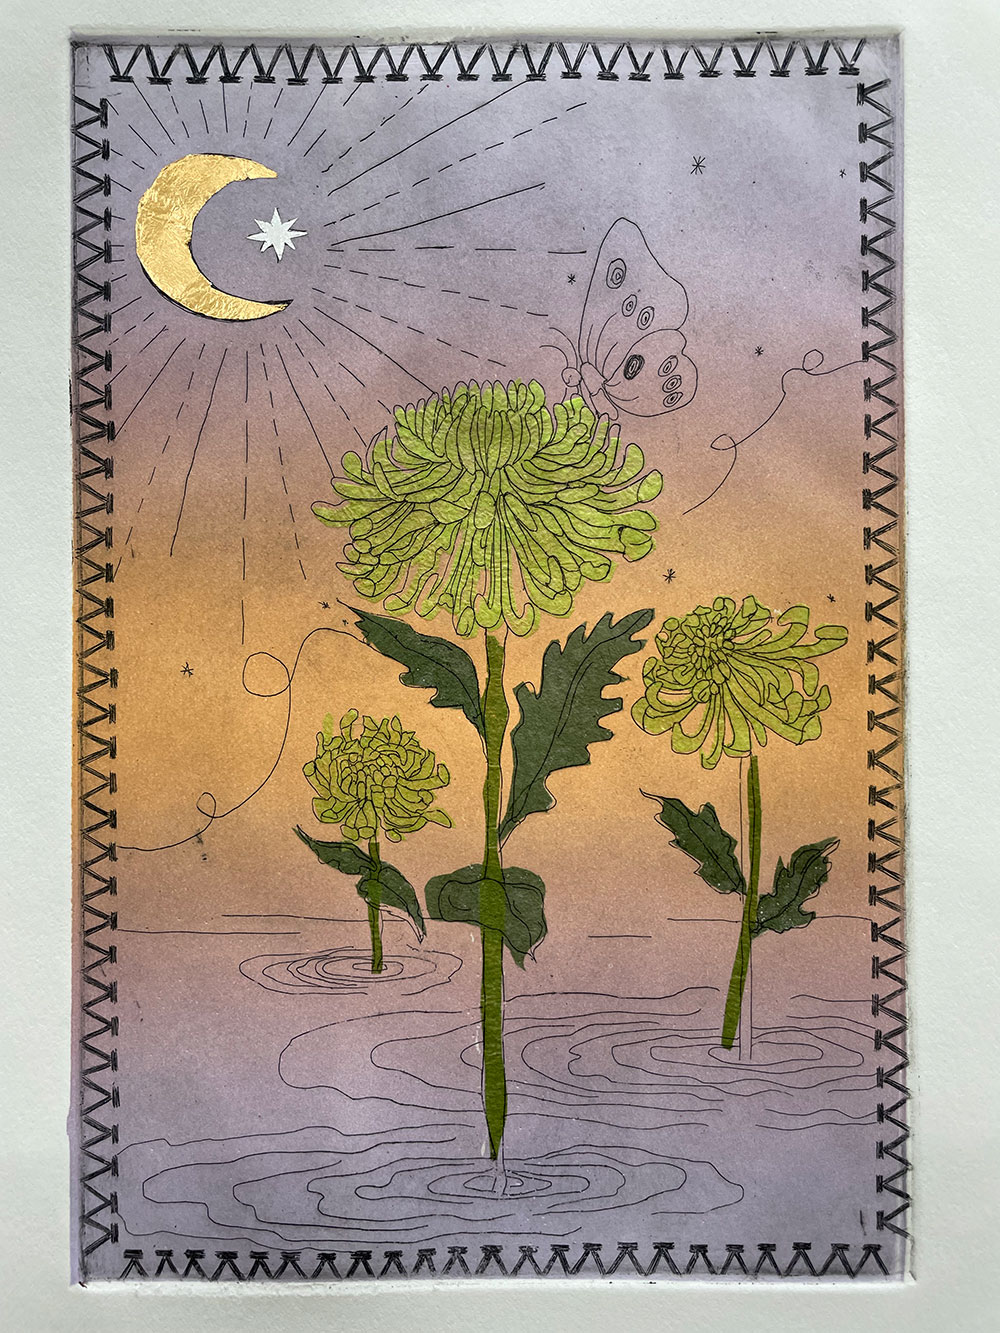 A colored printed image of 3 large yellow flowers, with a yellow moon, and a Butterly. the background is purple and yellow.